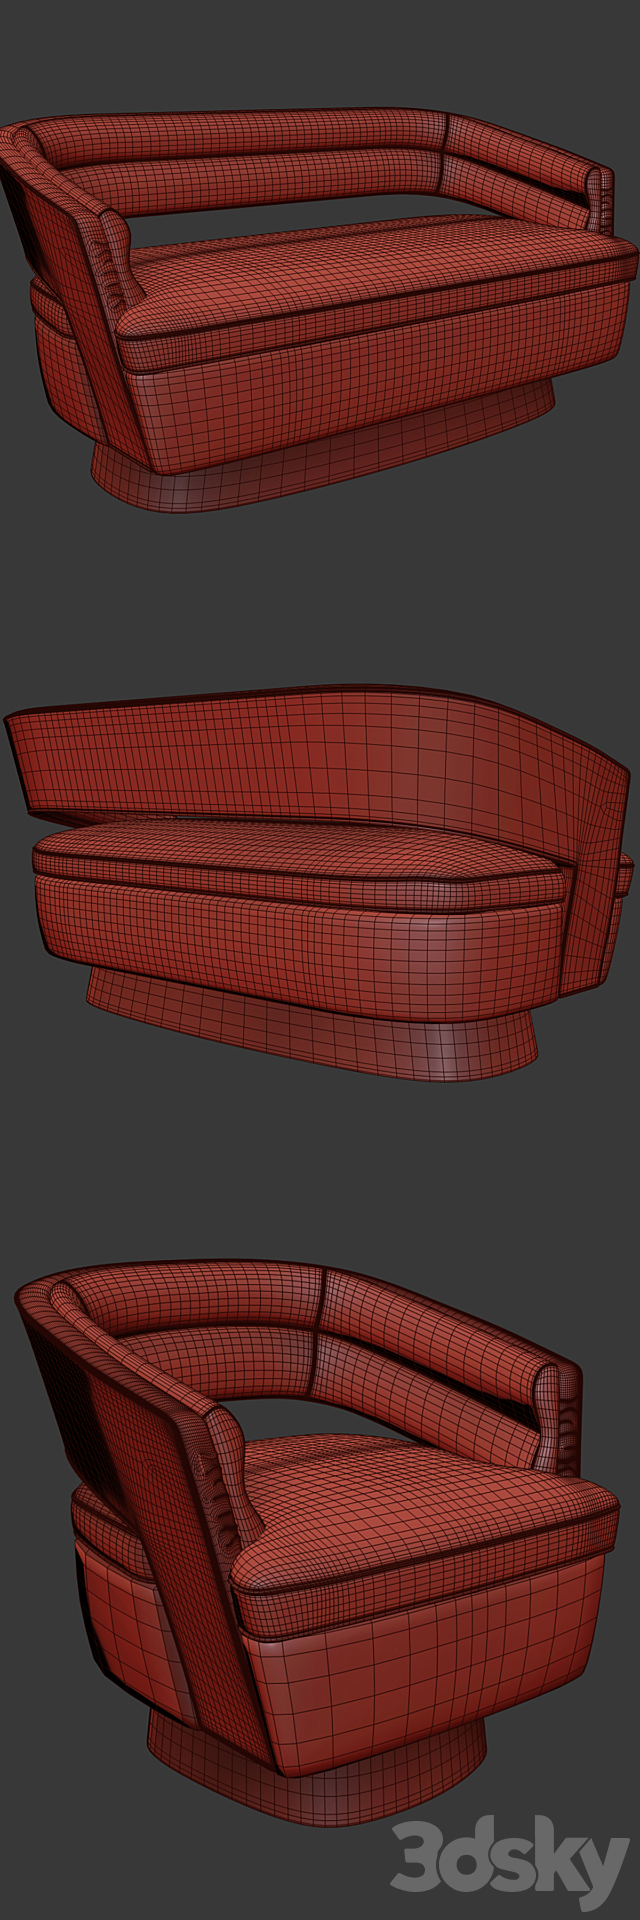 Russel Armchair And Sofa 3DSMax File - thumbnail 3